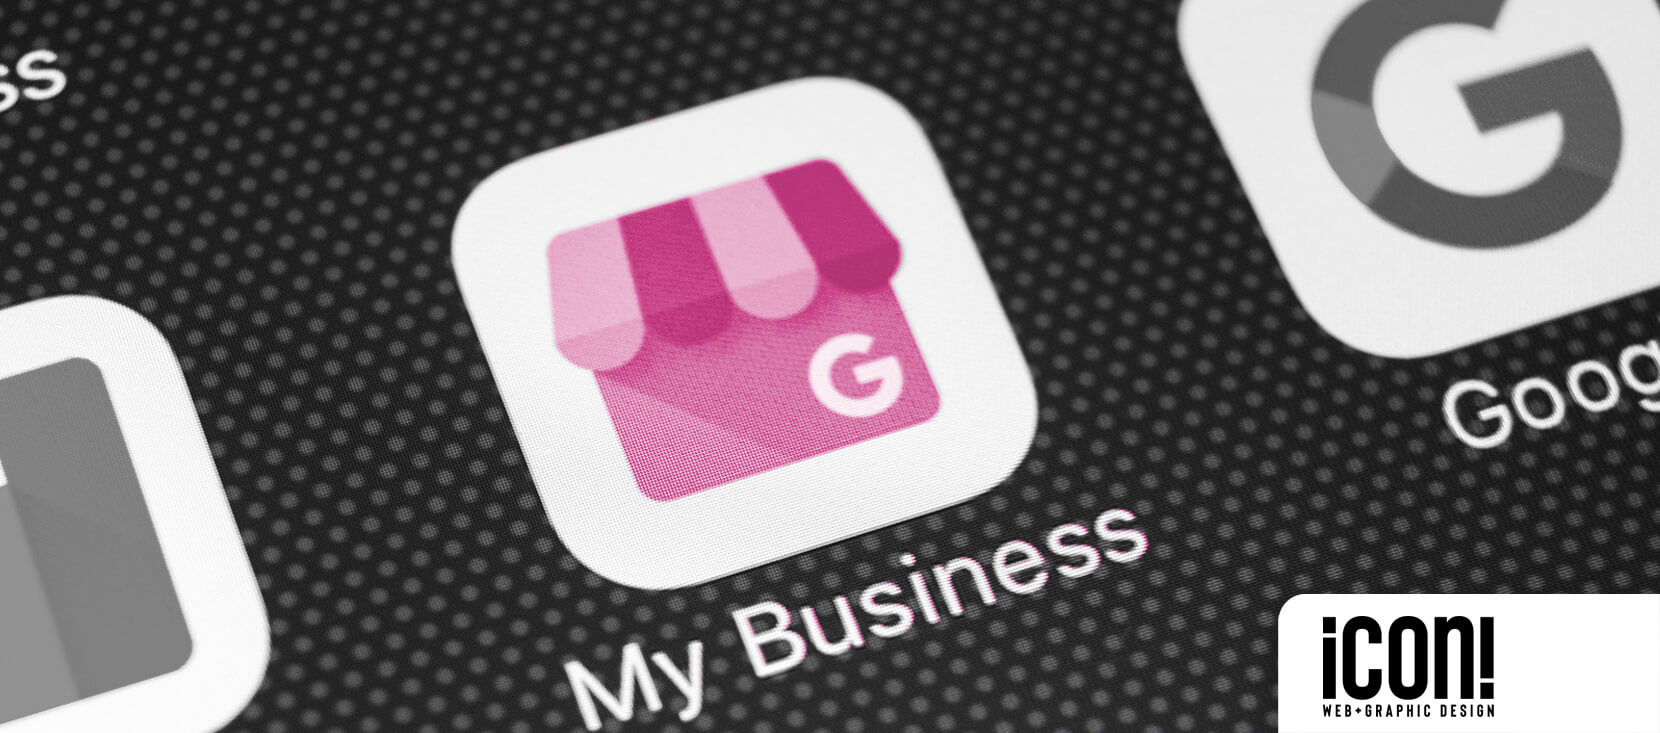 Icon Graphic Design Adelaide Blog - What is Google my Business, image of Google my Business icon on a mobile phone screen.